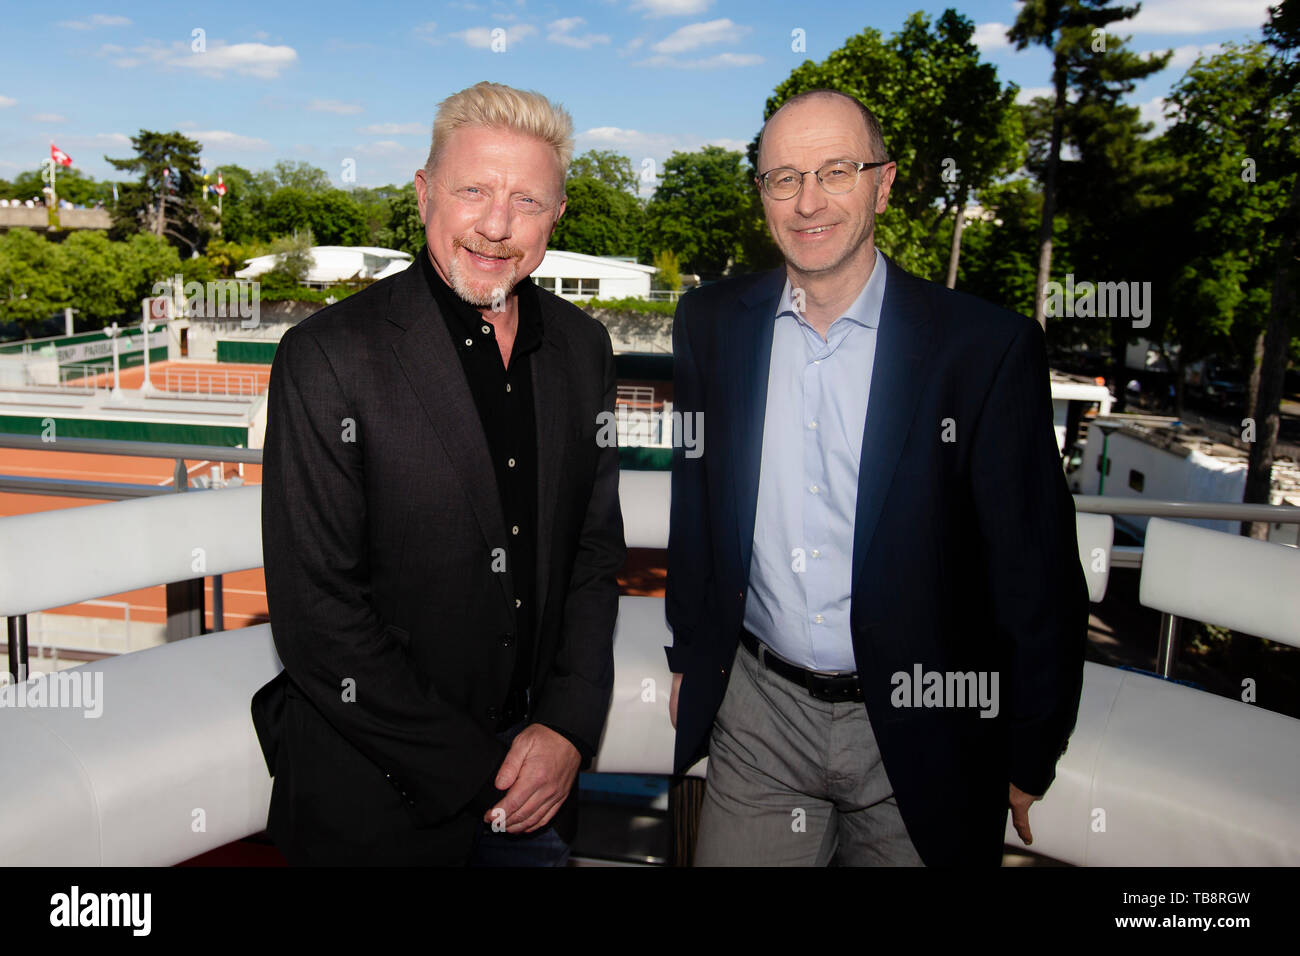 31 May 2019, France (France), Paris: Tennis: Grand Slam/ATP-Tour, French  Open: The three-time Wimbledon winner Boris Becker (l) as commentator  stands together with Eurosport presenter Matthias Stach in the TV studio.  Photo: